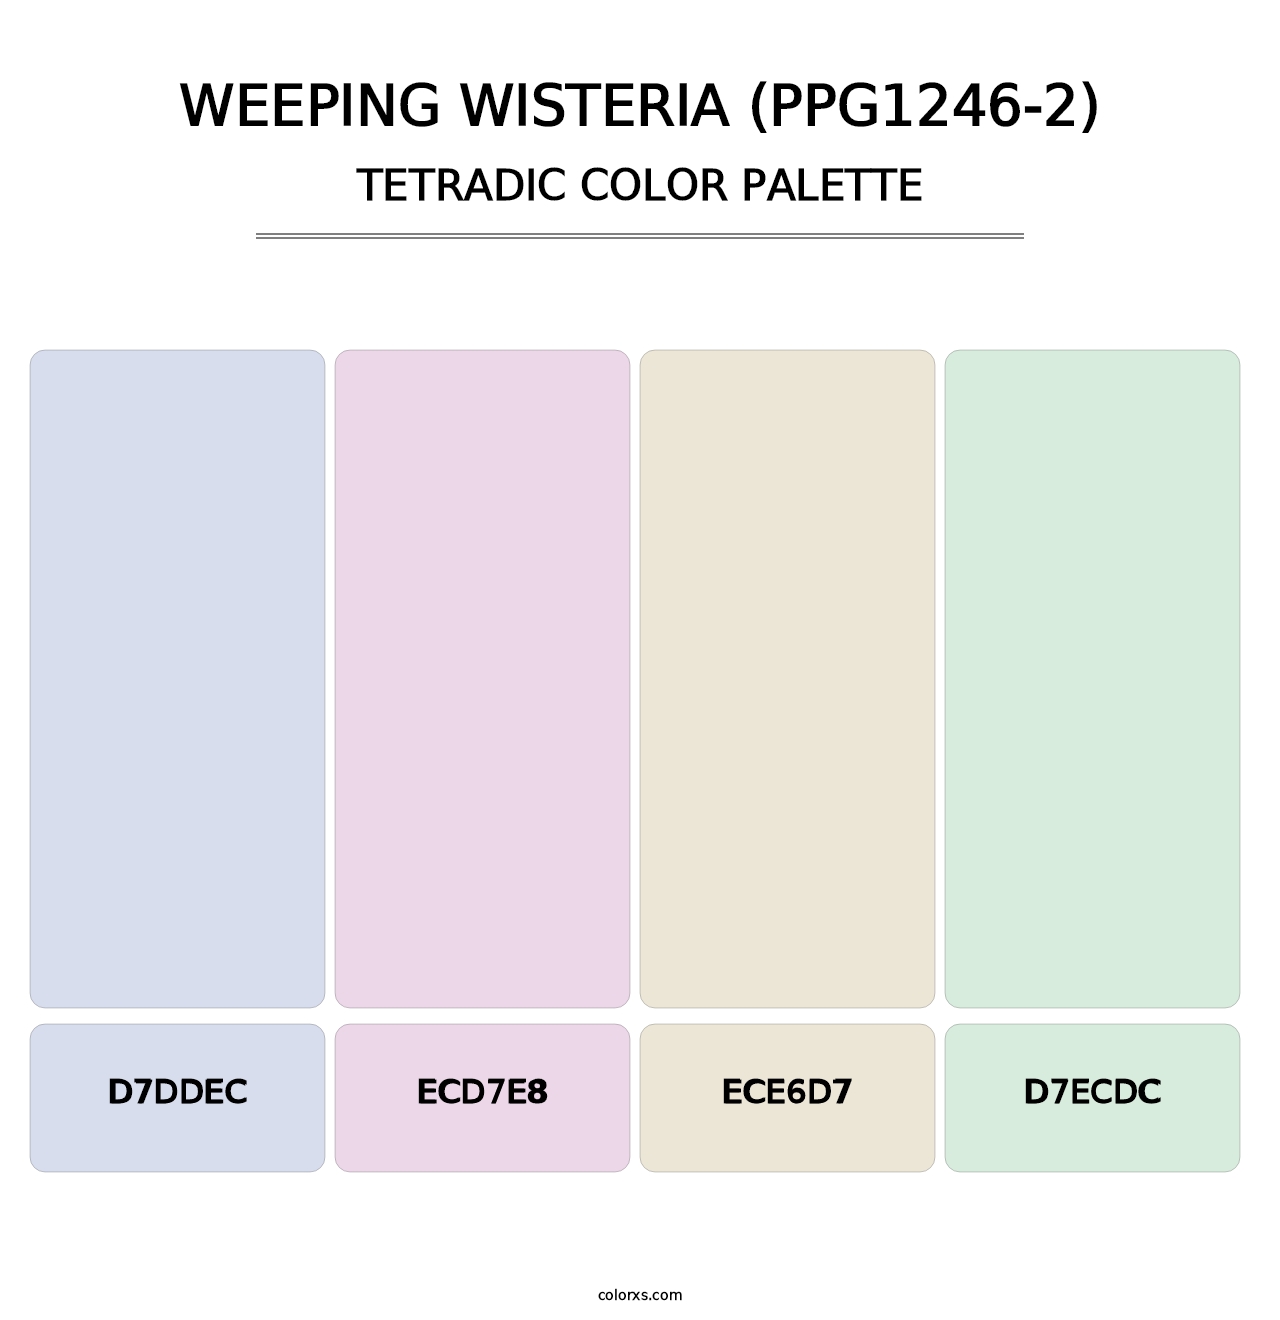 Weeping Wisteria (PPG1246-2) - Tetradic Color Palette